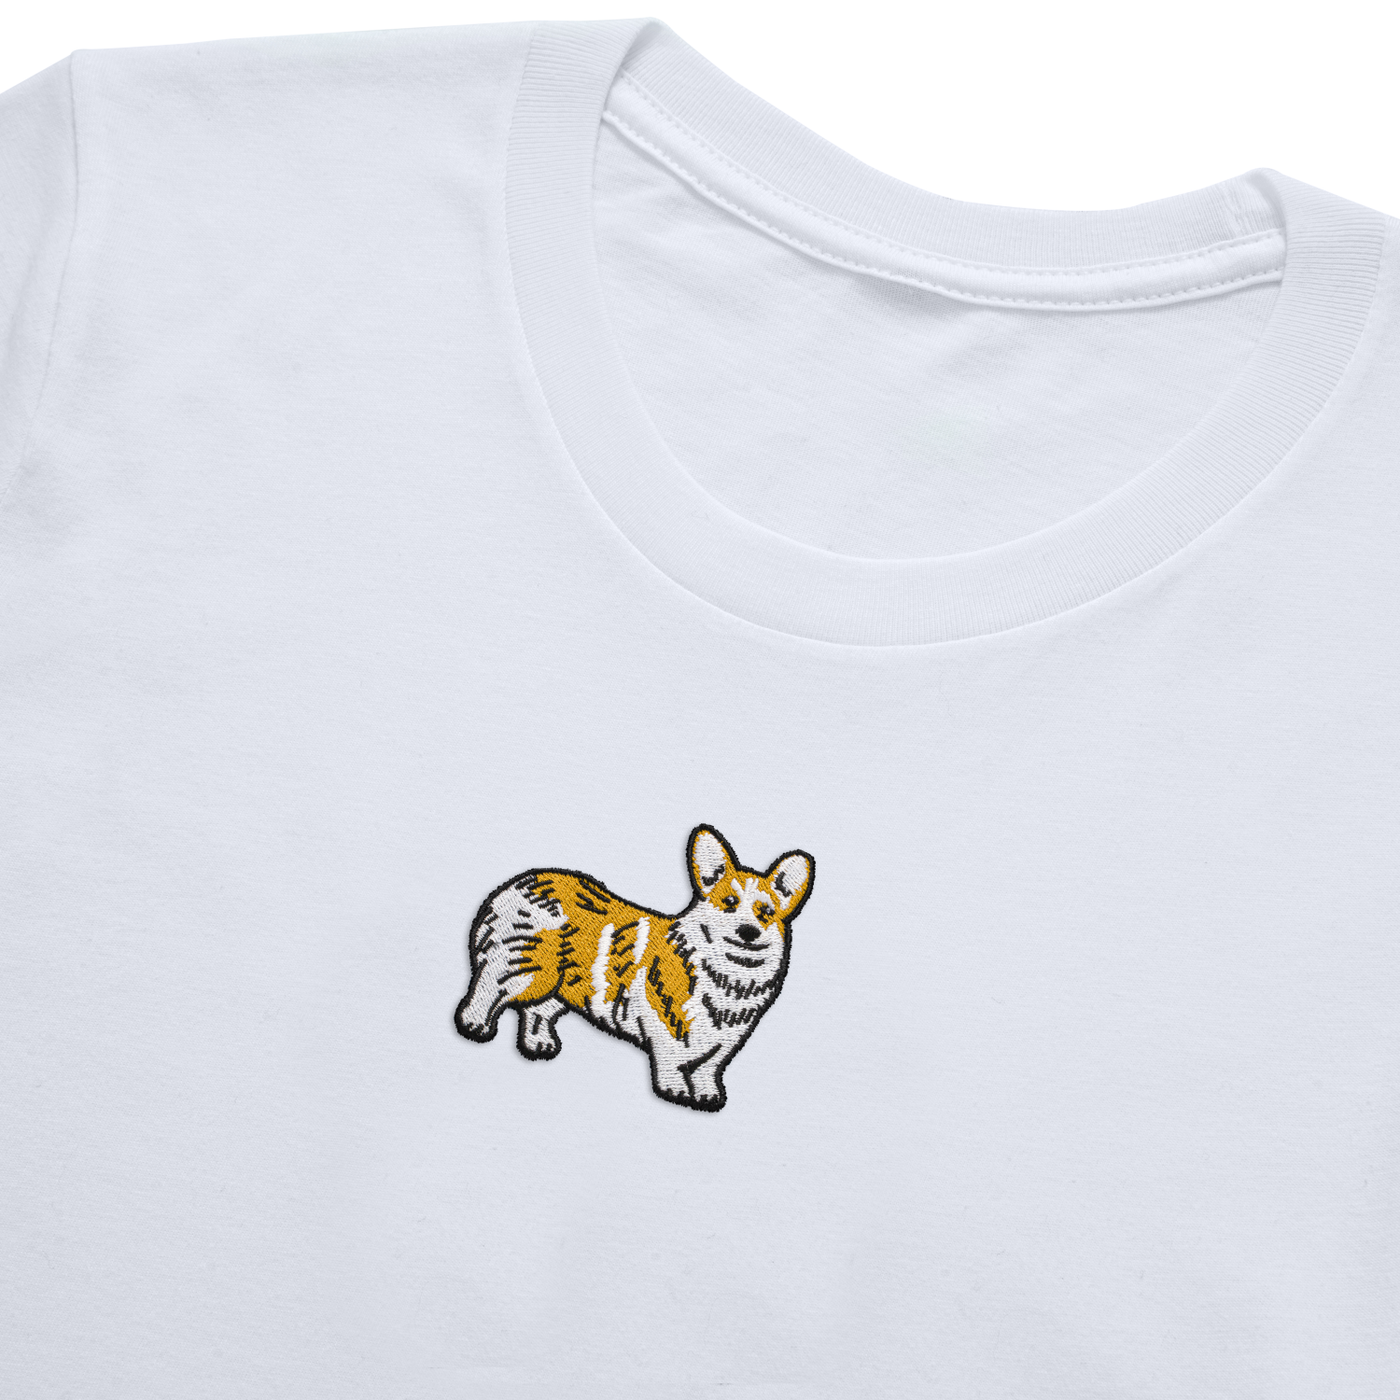 Bobby's Planet Men's Embroidered Corgi T-Shirt from Paws Dog Cat Animals Collection in White Color#color_white